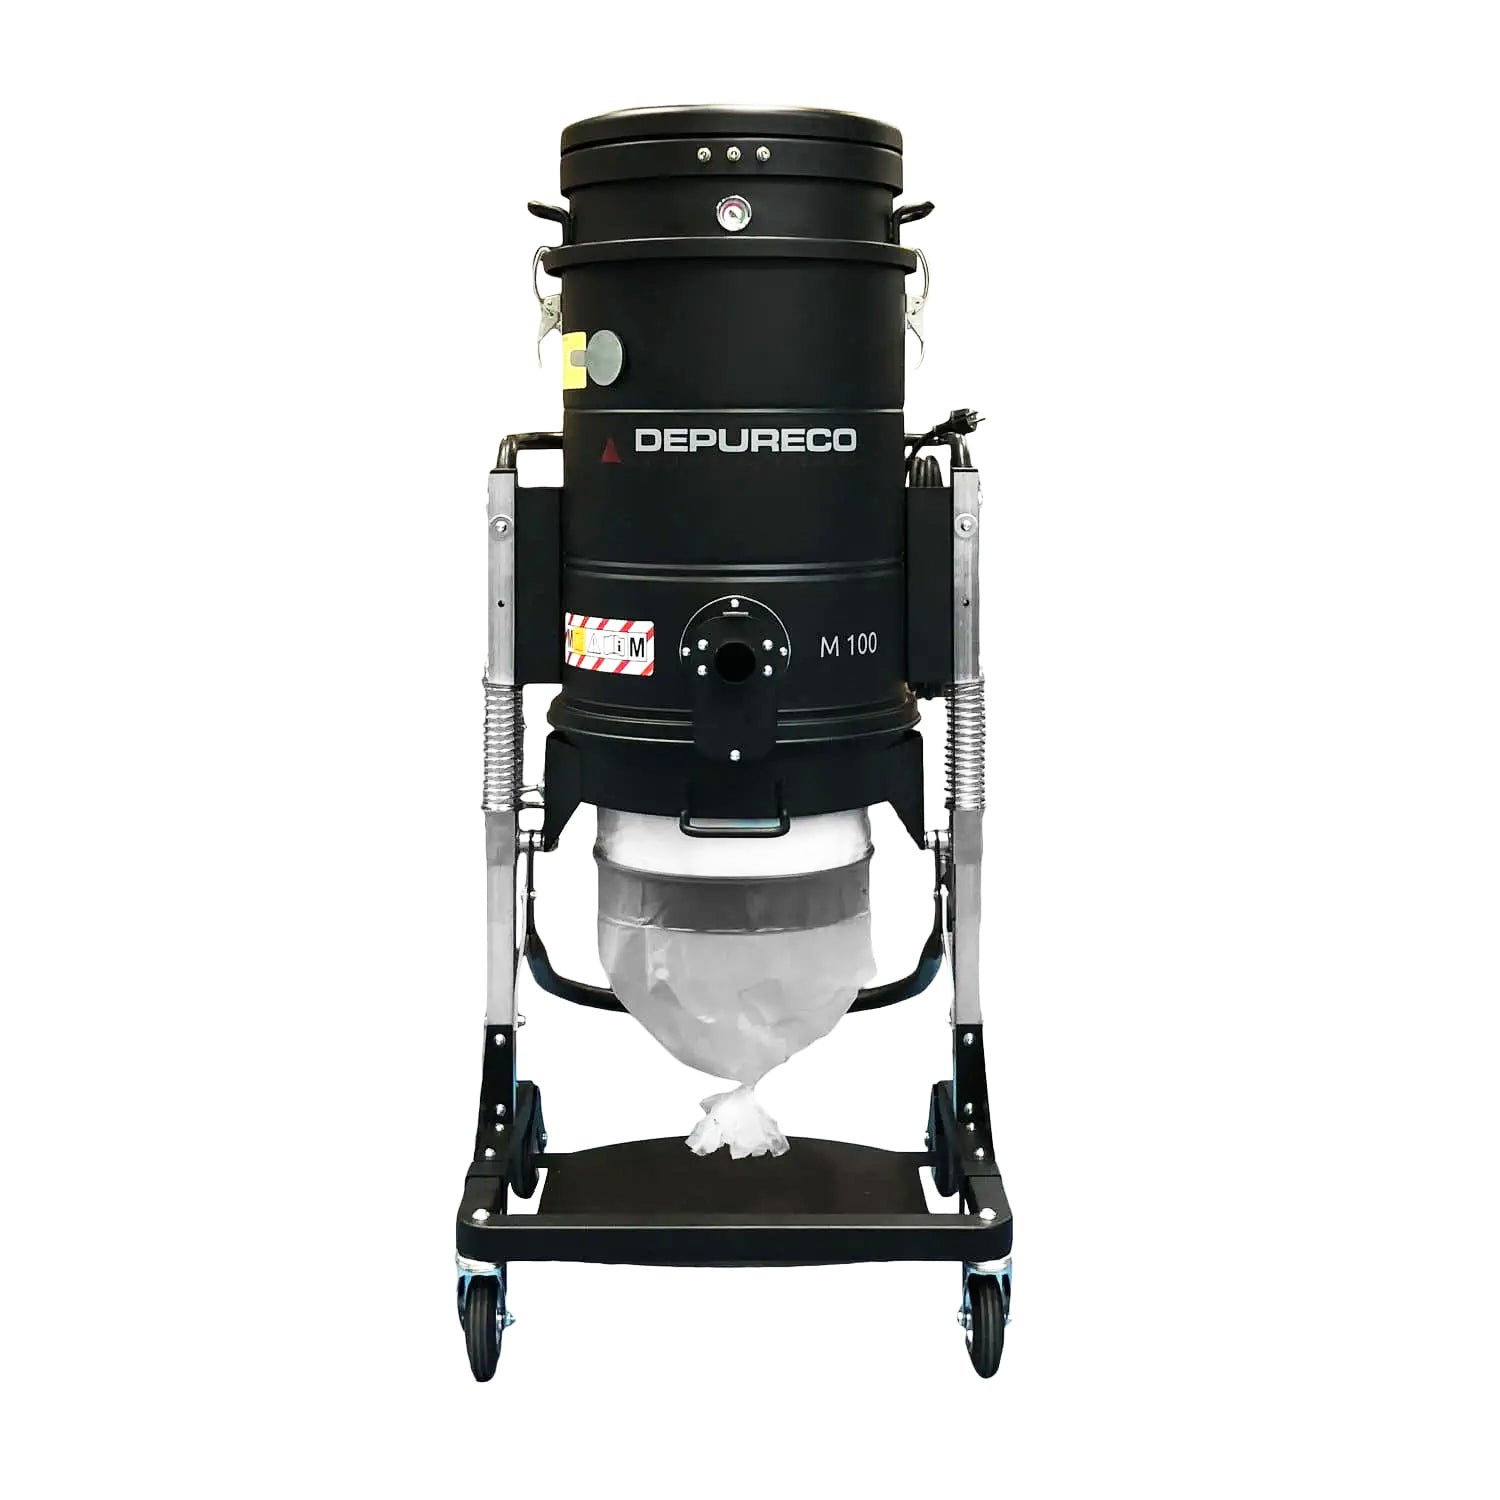 M100LP DustDust Collector - Xtreme Polishing Systems: dust collector systems, concrete dust extractors, and concrete grinding vacuums.